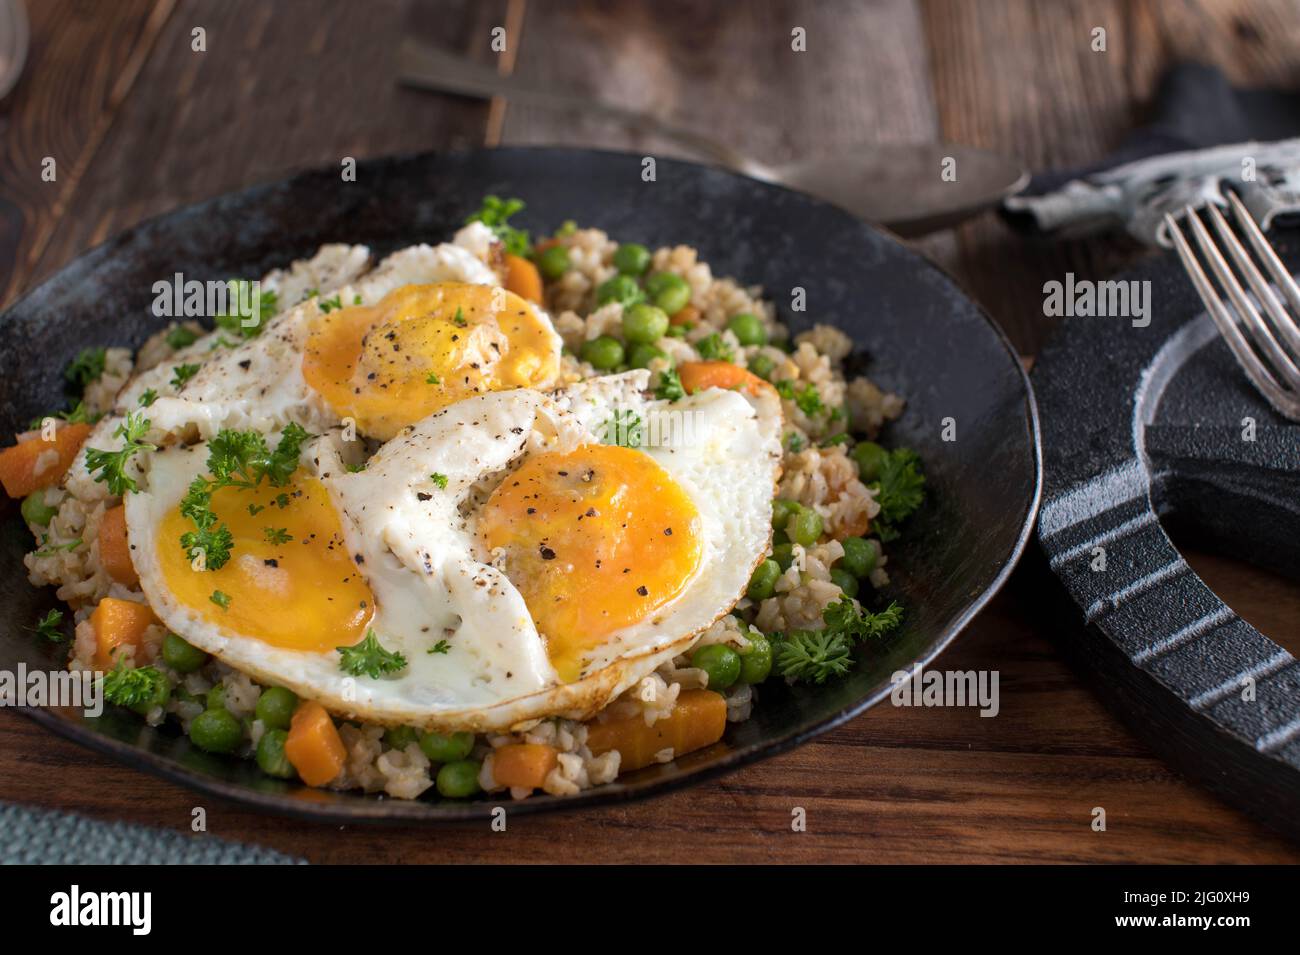 Bodybuilding meal with fried eggs, brown rice and vegetables Stock Photo